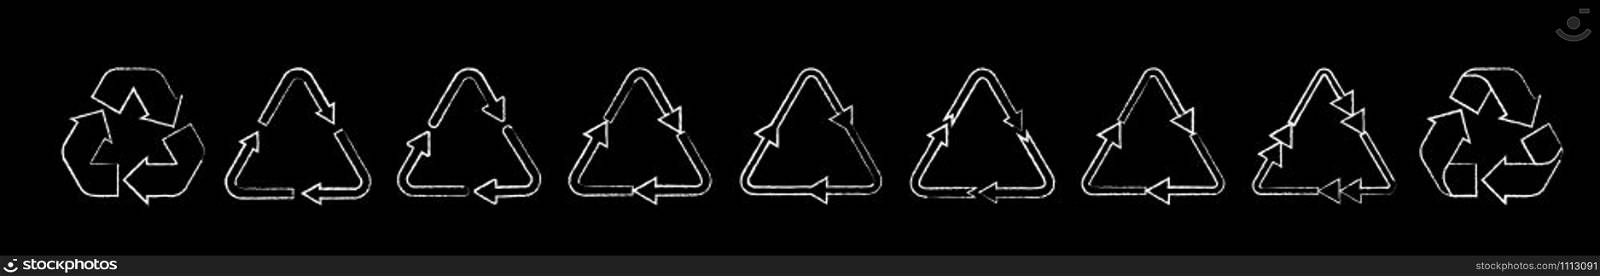 Chalked recycle triangle arrow symbols set vector illustration. White chalk style pictograms of reuse or recycling process, arrow cycle in triangle isolated on blackboard for enviromental infographic. Chalked recycle triangle arrow symbols vector set